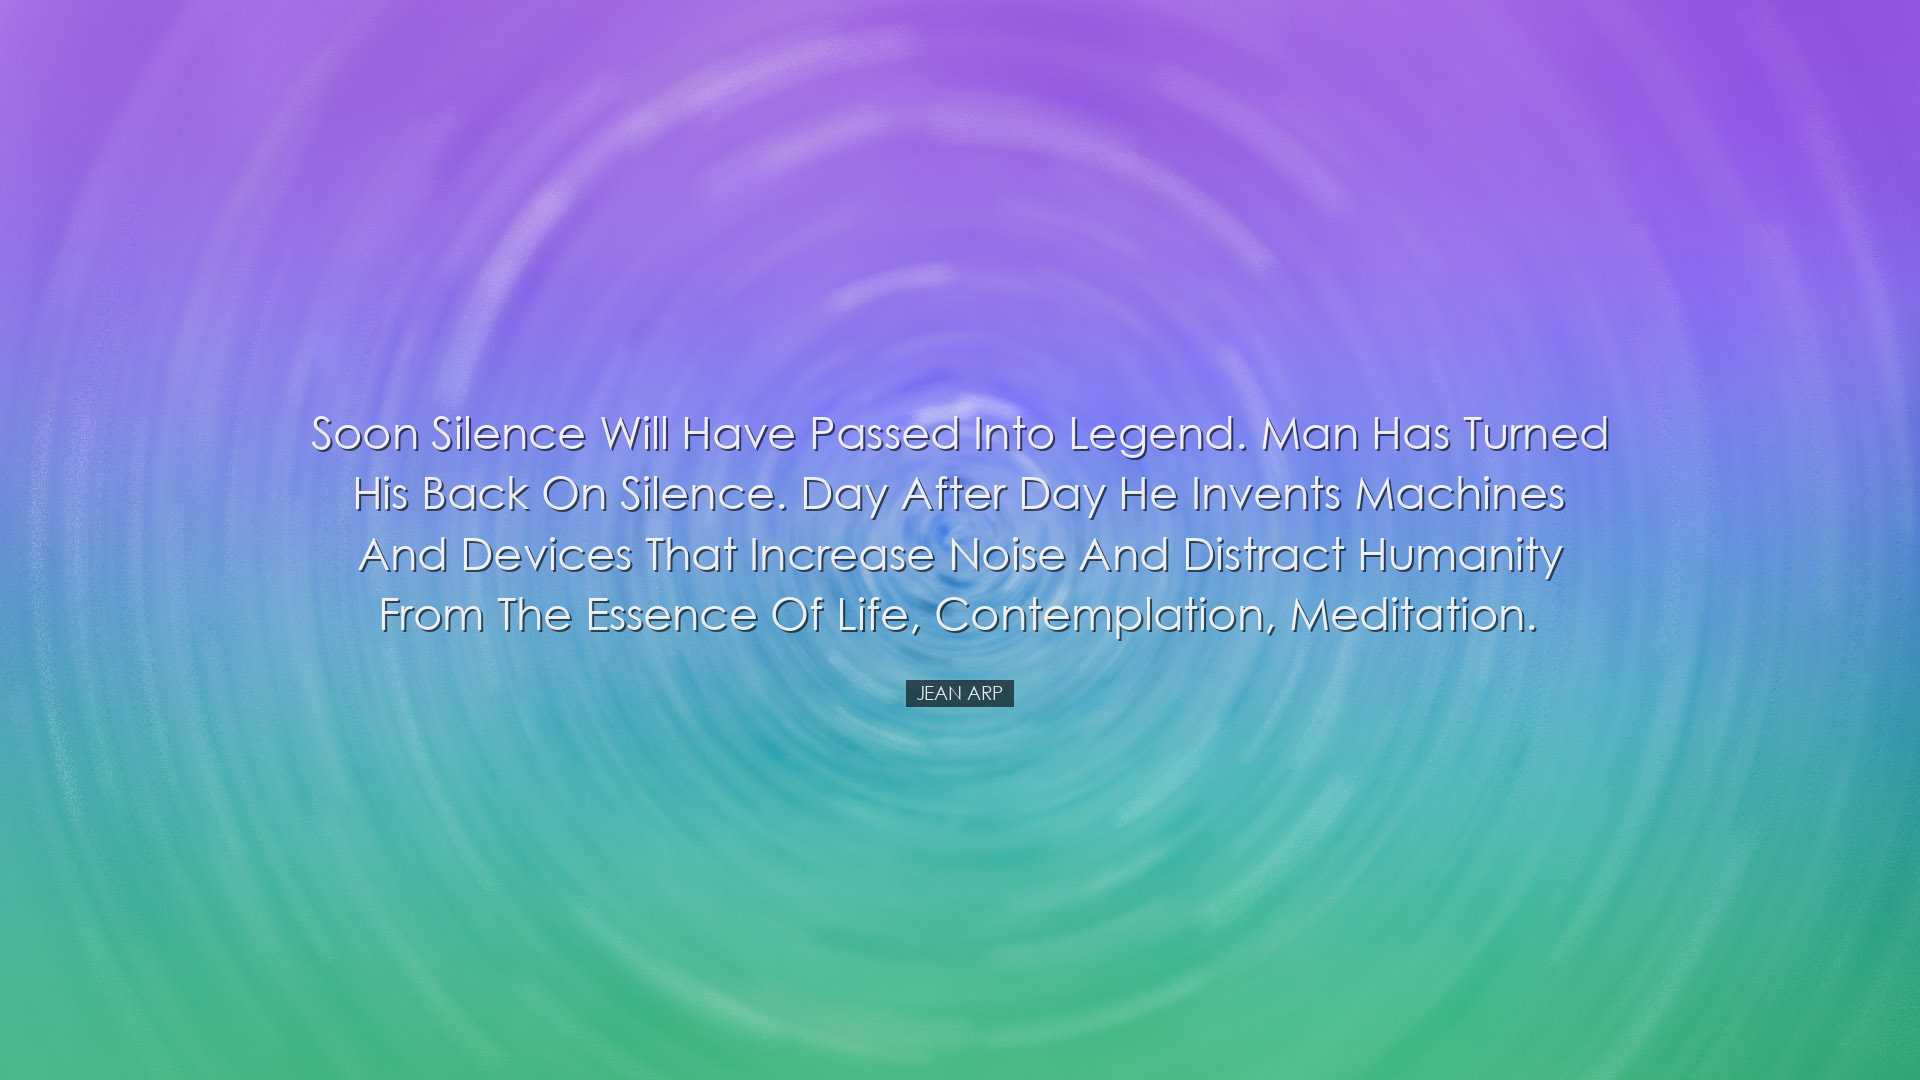 Soon silence will have passed into legend. Man has turned his back